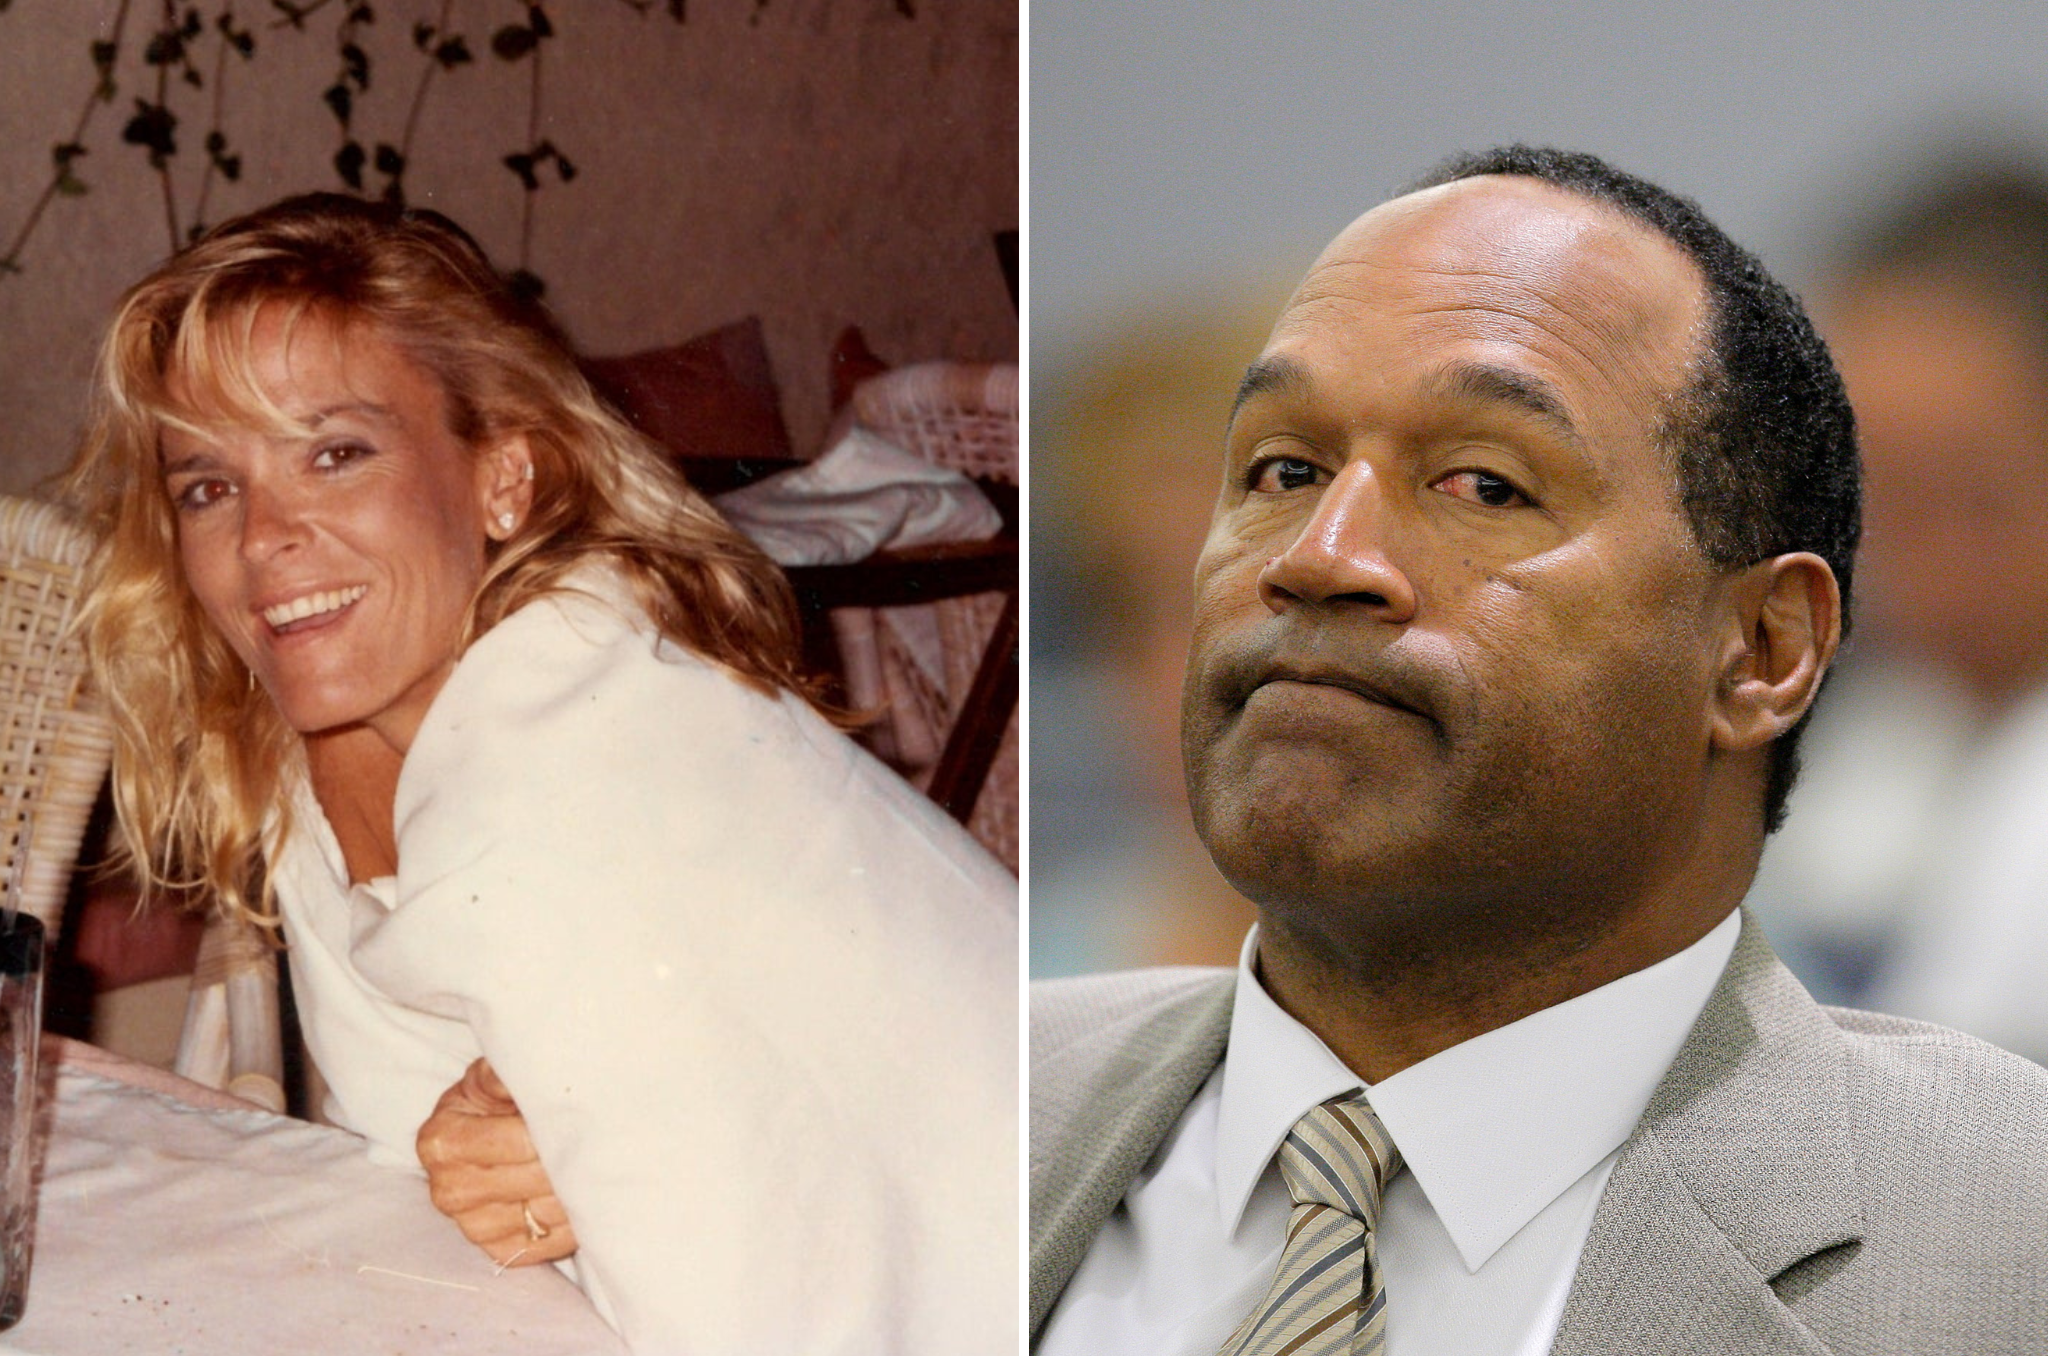 Nicole Brown Simpson and OJ Simpson. Diary entries featured in a new Lifetime documentary highlight the abuse Nicole says OJ inflicted.